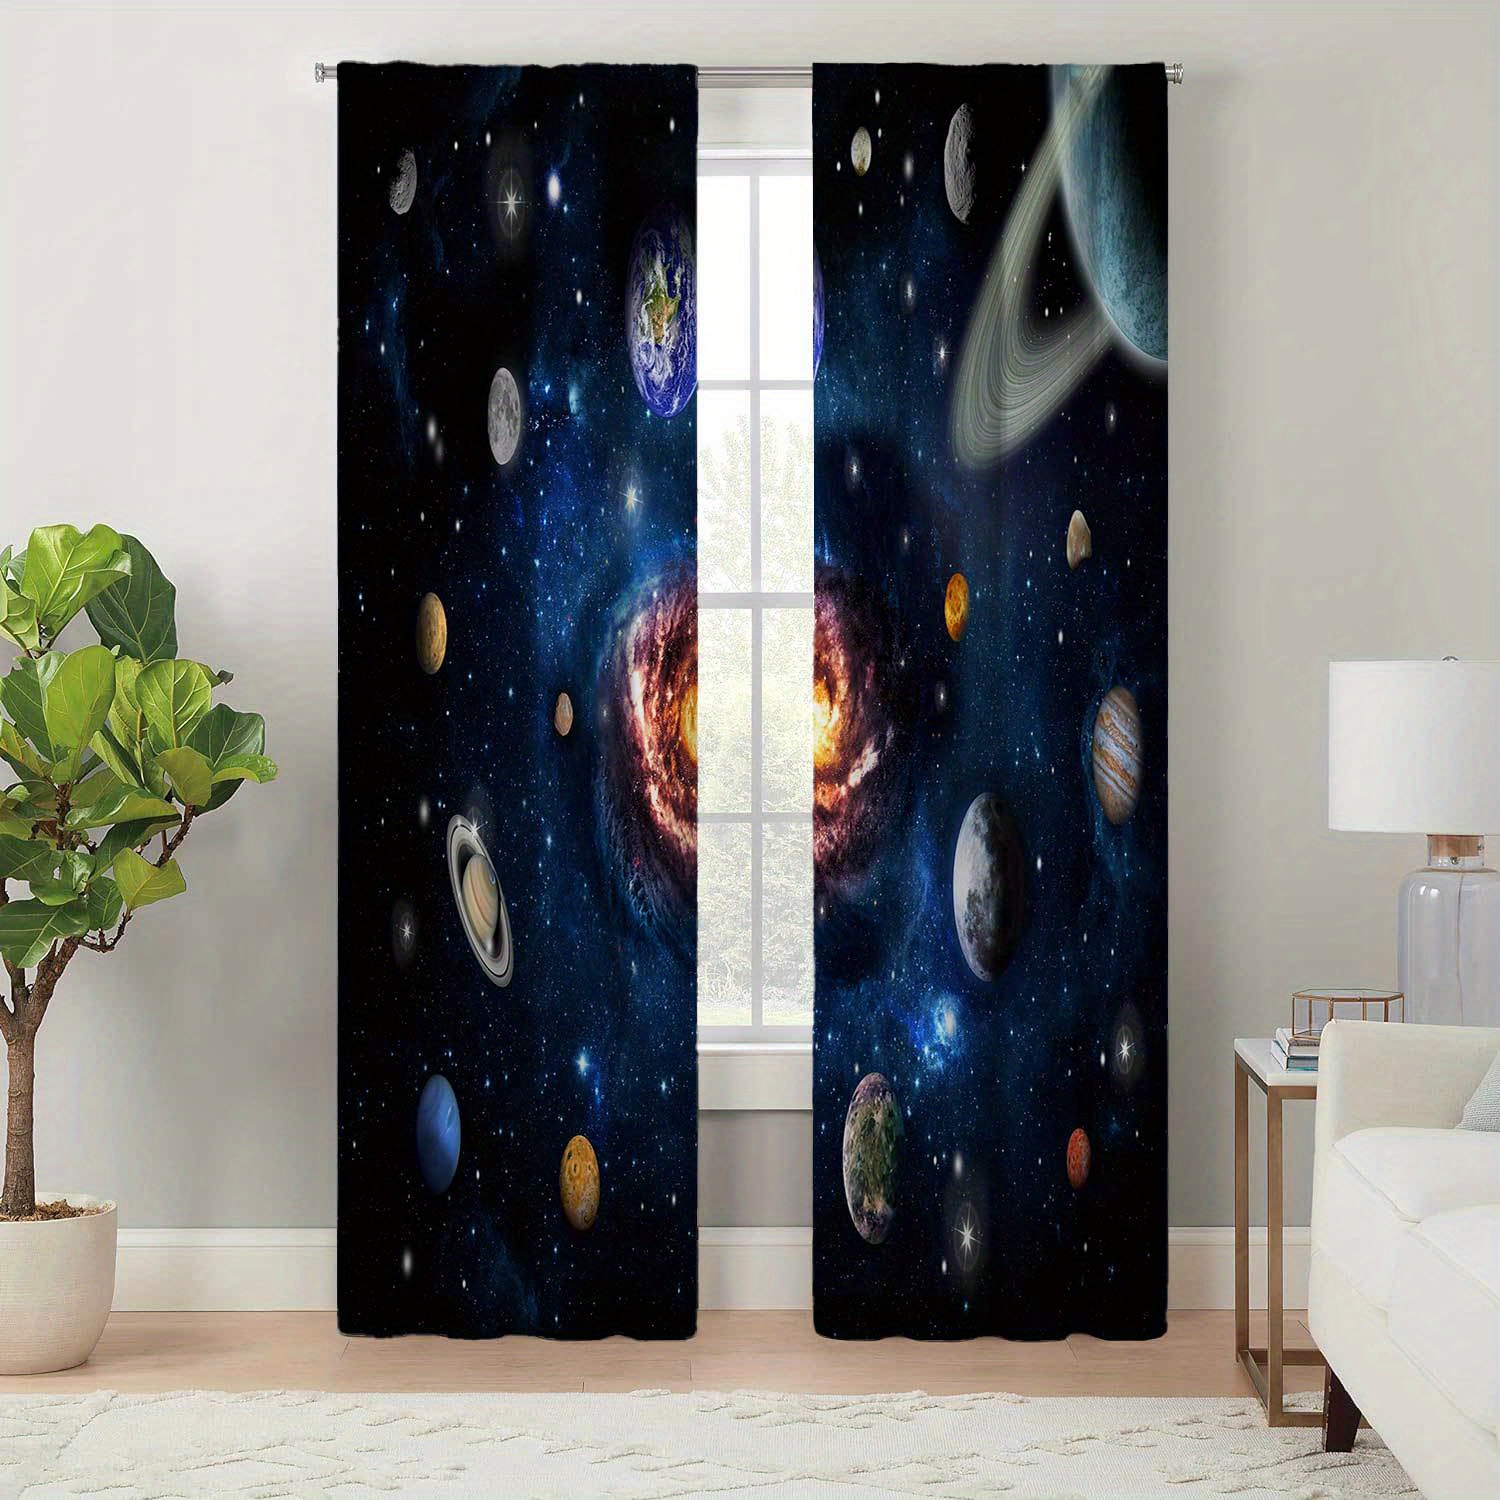 

Space Themed Blackout Curtains | Living Room Pastoral Jacquard Weave | Polyester Cosmic Planets & Galaxy Print Drapes With Tie Back | Machine Washable, Easy-hang Boho Style Curtain Panels